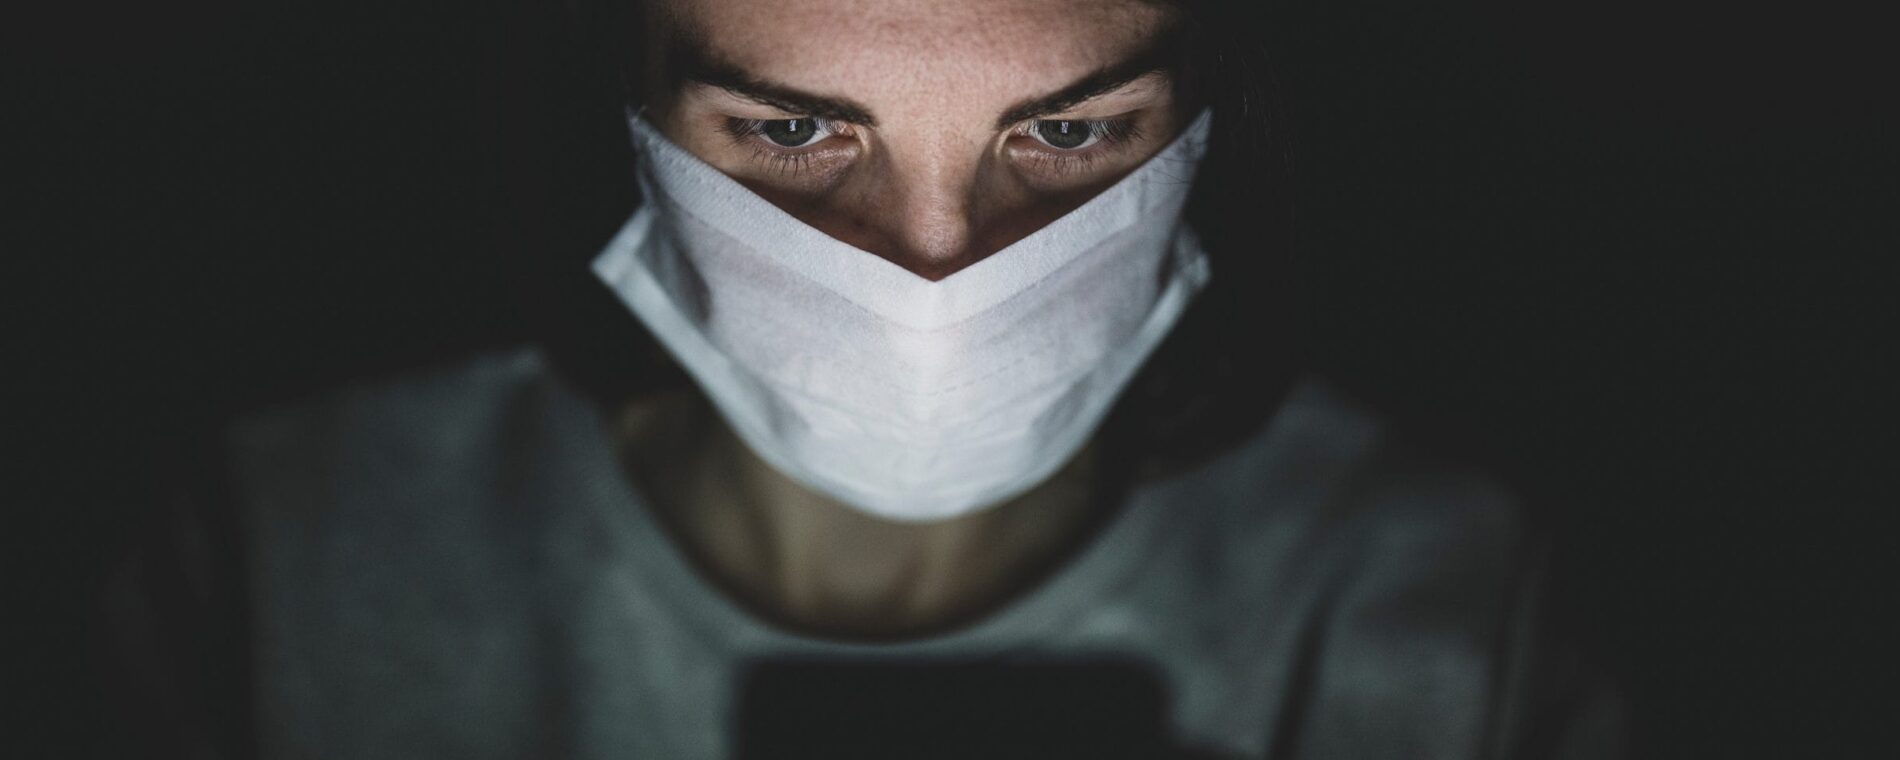 Girl with mask to protect her from Coronavirus